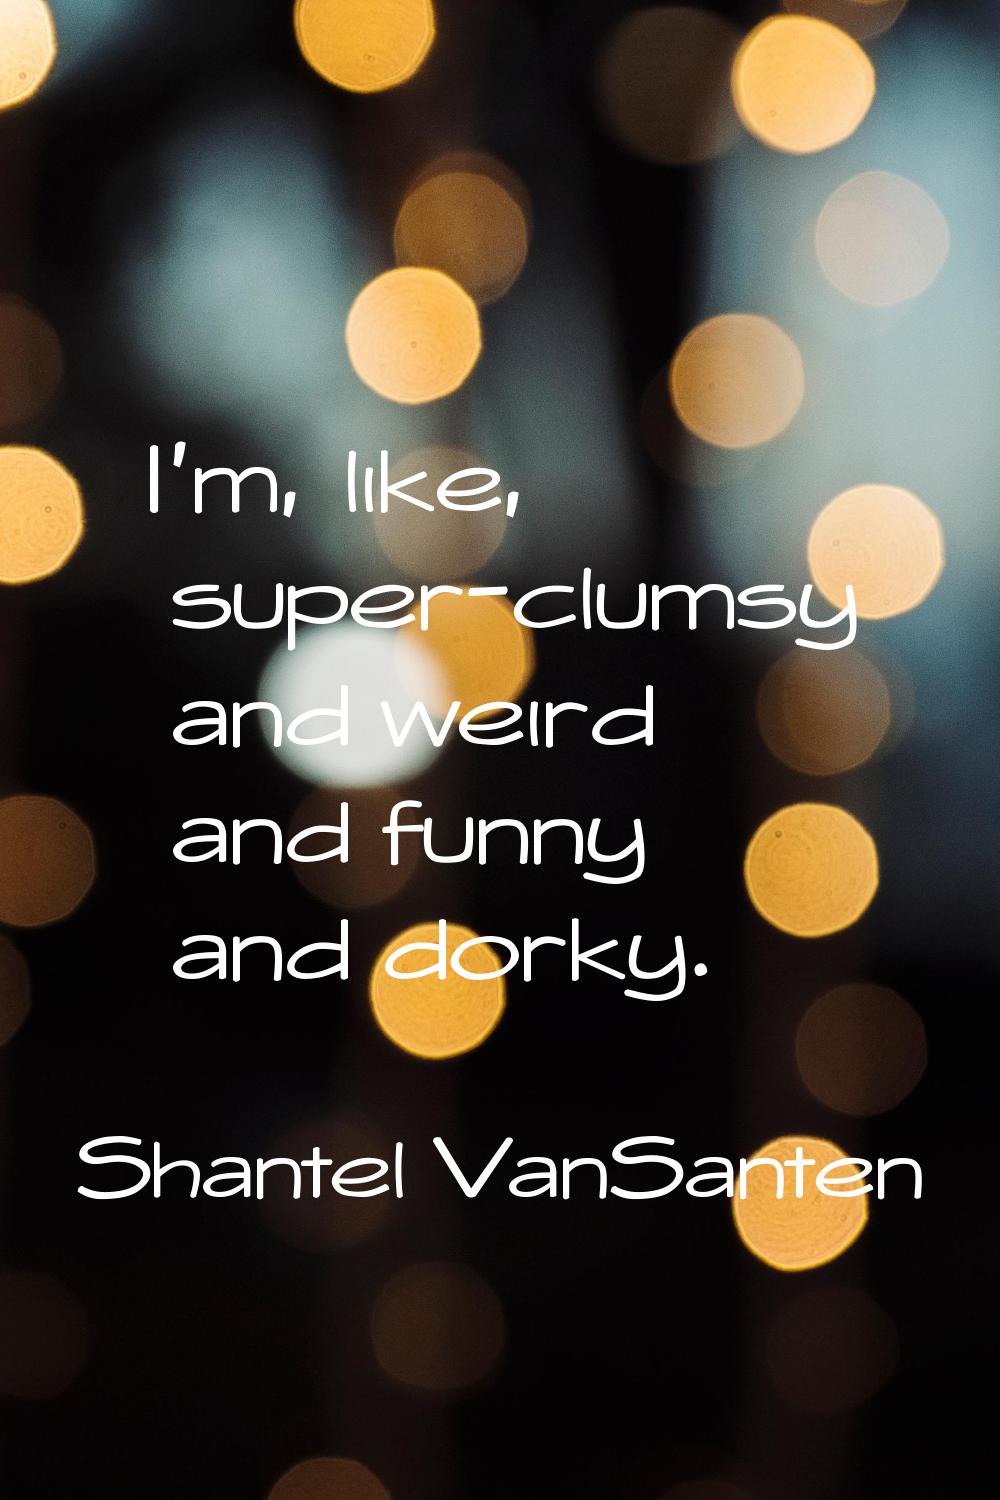 I'm, like, super-clumsy and weird and funny and dorky.